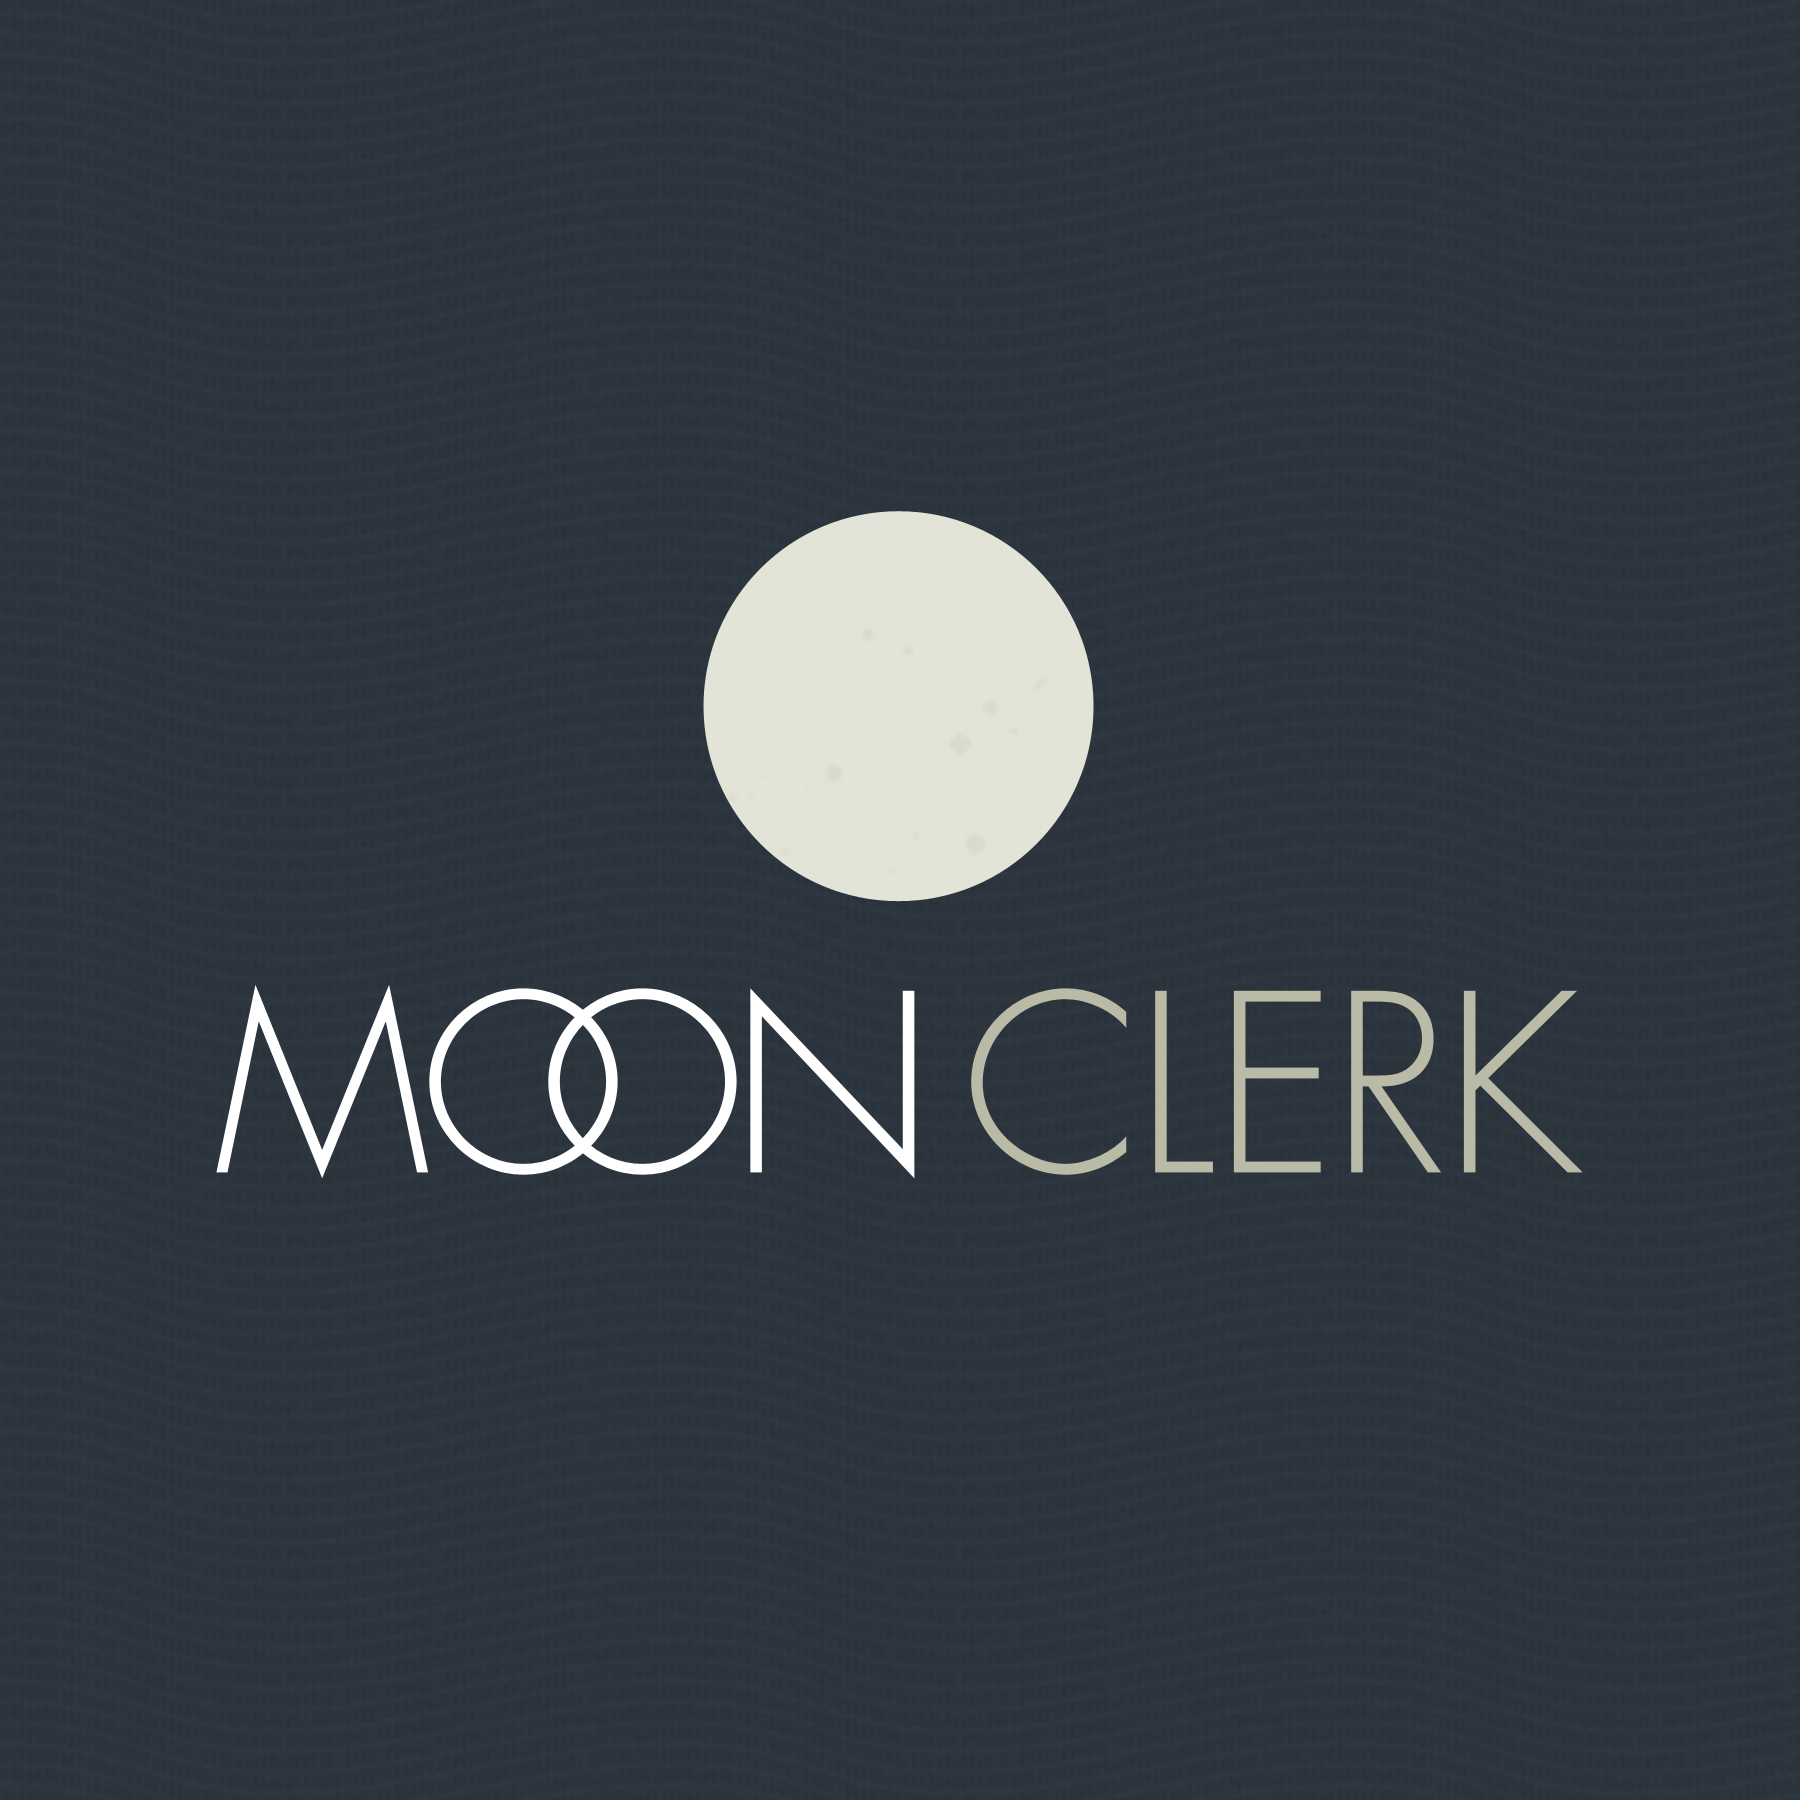 MoonClerk Allows Non-Programmers To Use Stripe For One-Time Or Recurring Payments | TechCrunch